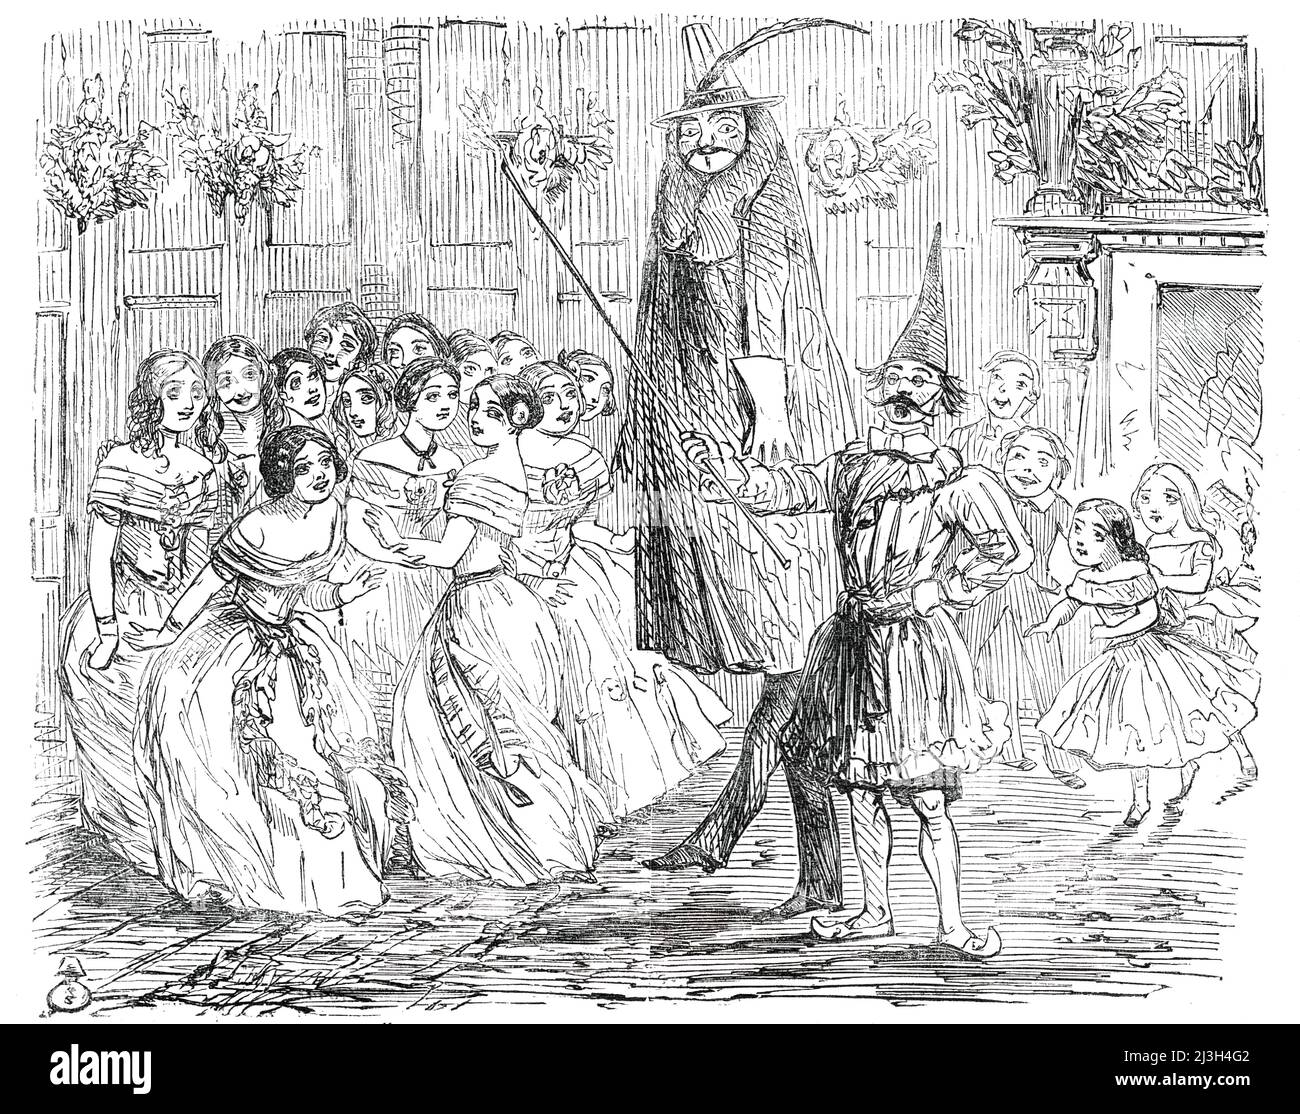 There Is No Deception - drawn by Leech, 1850. Illustration to &quot;Christmas Interiors&quot;, an article by the Old Batchelor. 'I heard a terrific burst, half terror, half laughter, with cries, and rushings to and fro, and gigglings and shouts. Opening the door - Oh these children! what miracle will not their happy presence work on the sourest, and most rational and atrabilious of us old folks !- if there was not grave and iconoclastic Mr. Twinge, Q.C., with all his weight of law, and fifty-six years on his head, performing the &quot;Giant,&quot; draped in Mr. Eyebright's dressing-gown, surmo Stock Photo